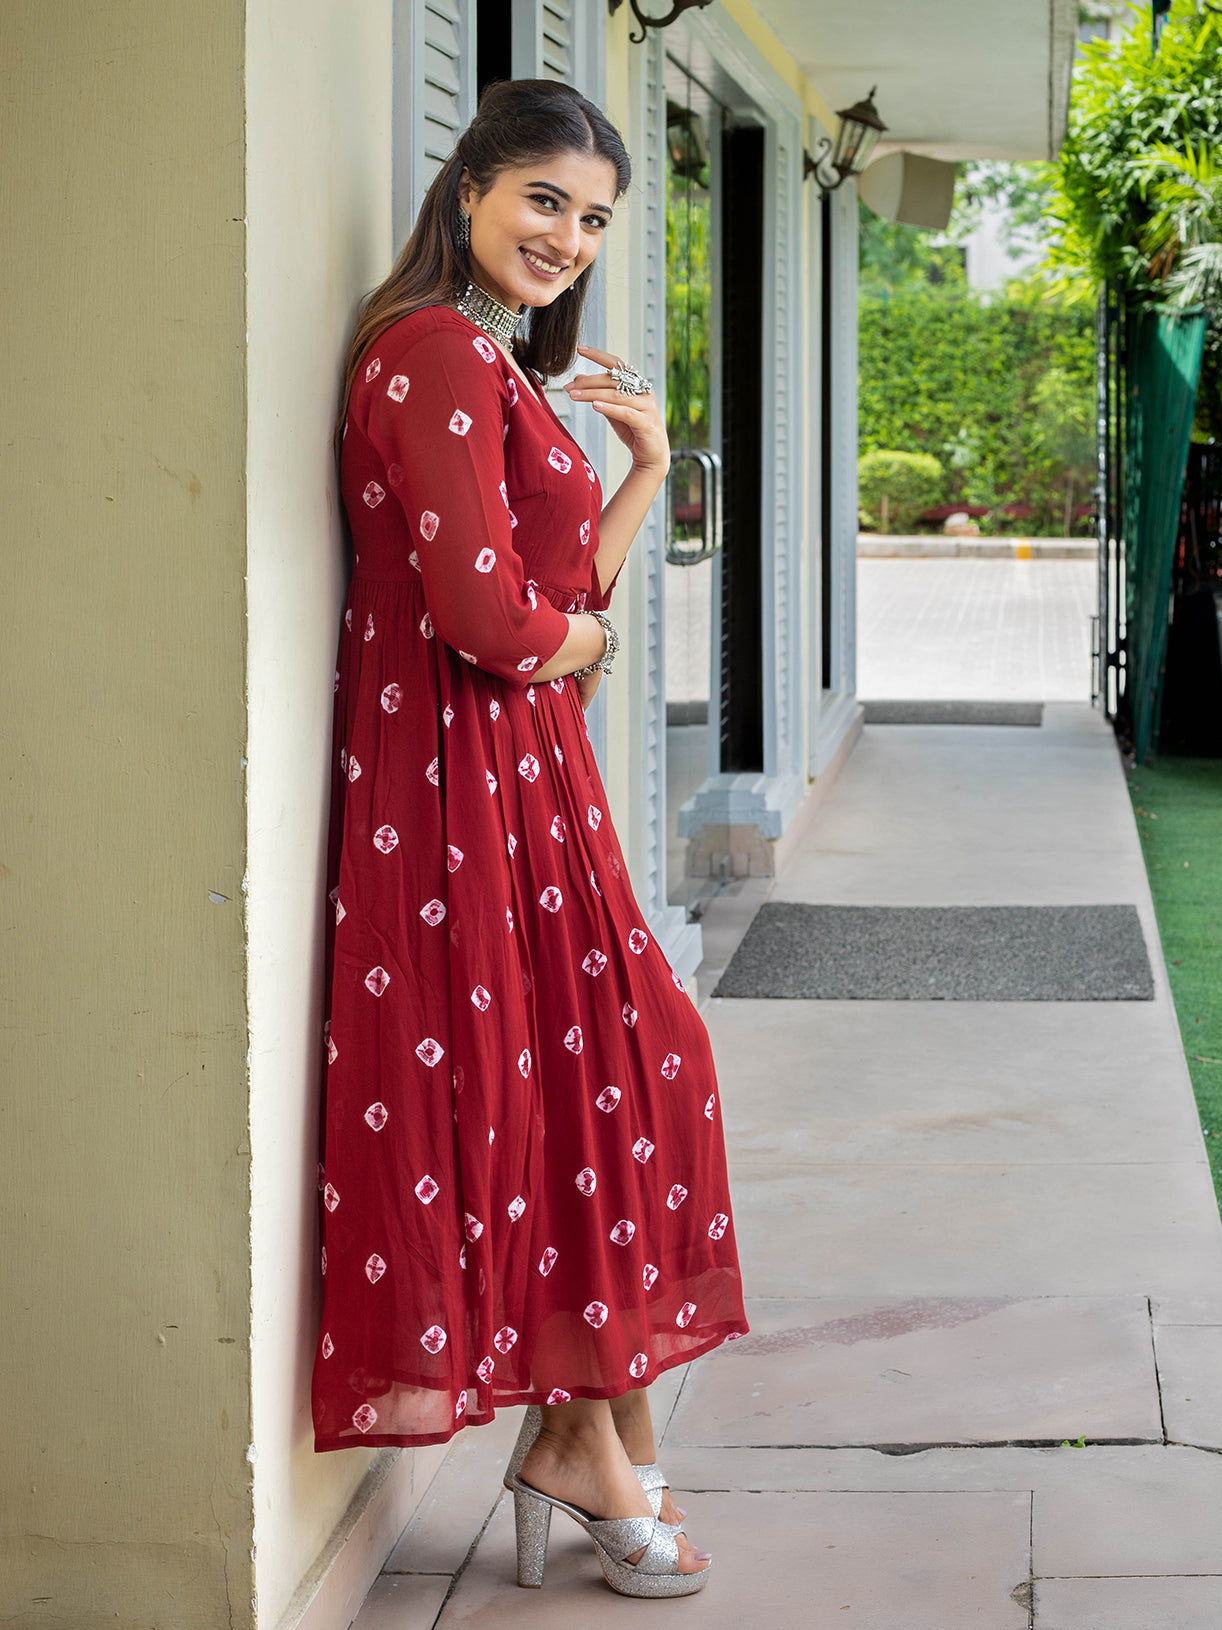 embrace-tradition-with-our-maroon-angrakha-anarkali-dress-the-mesmerizing-bandhani-print-adds-a-touch-of-classic-elegance